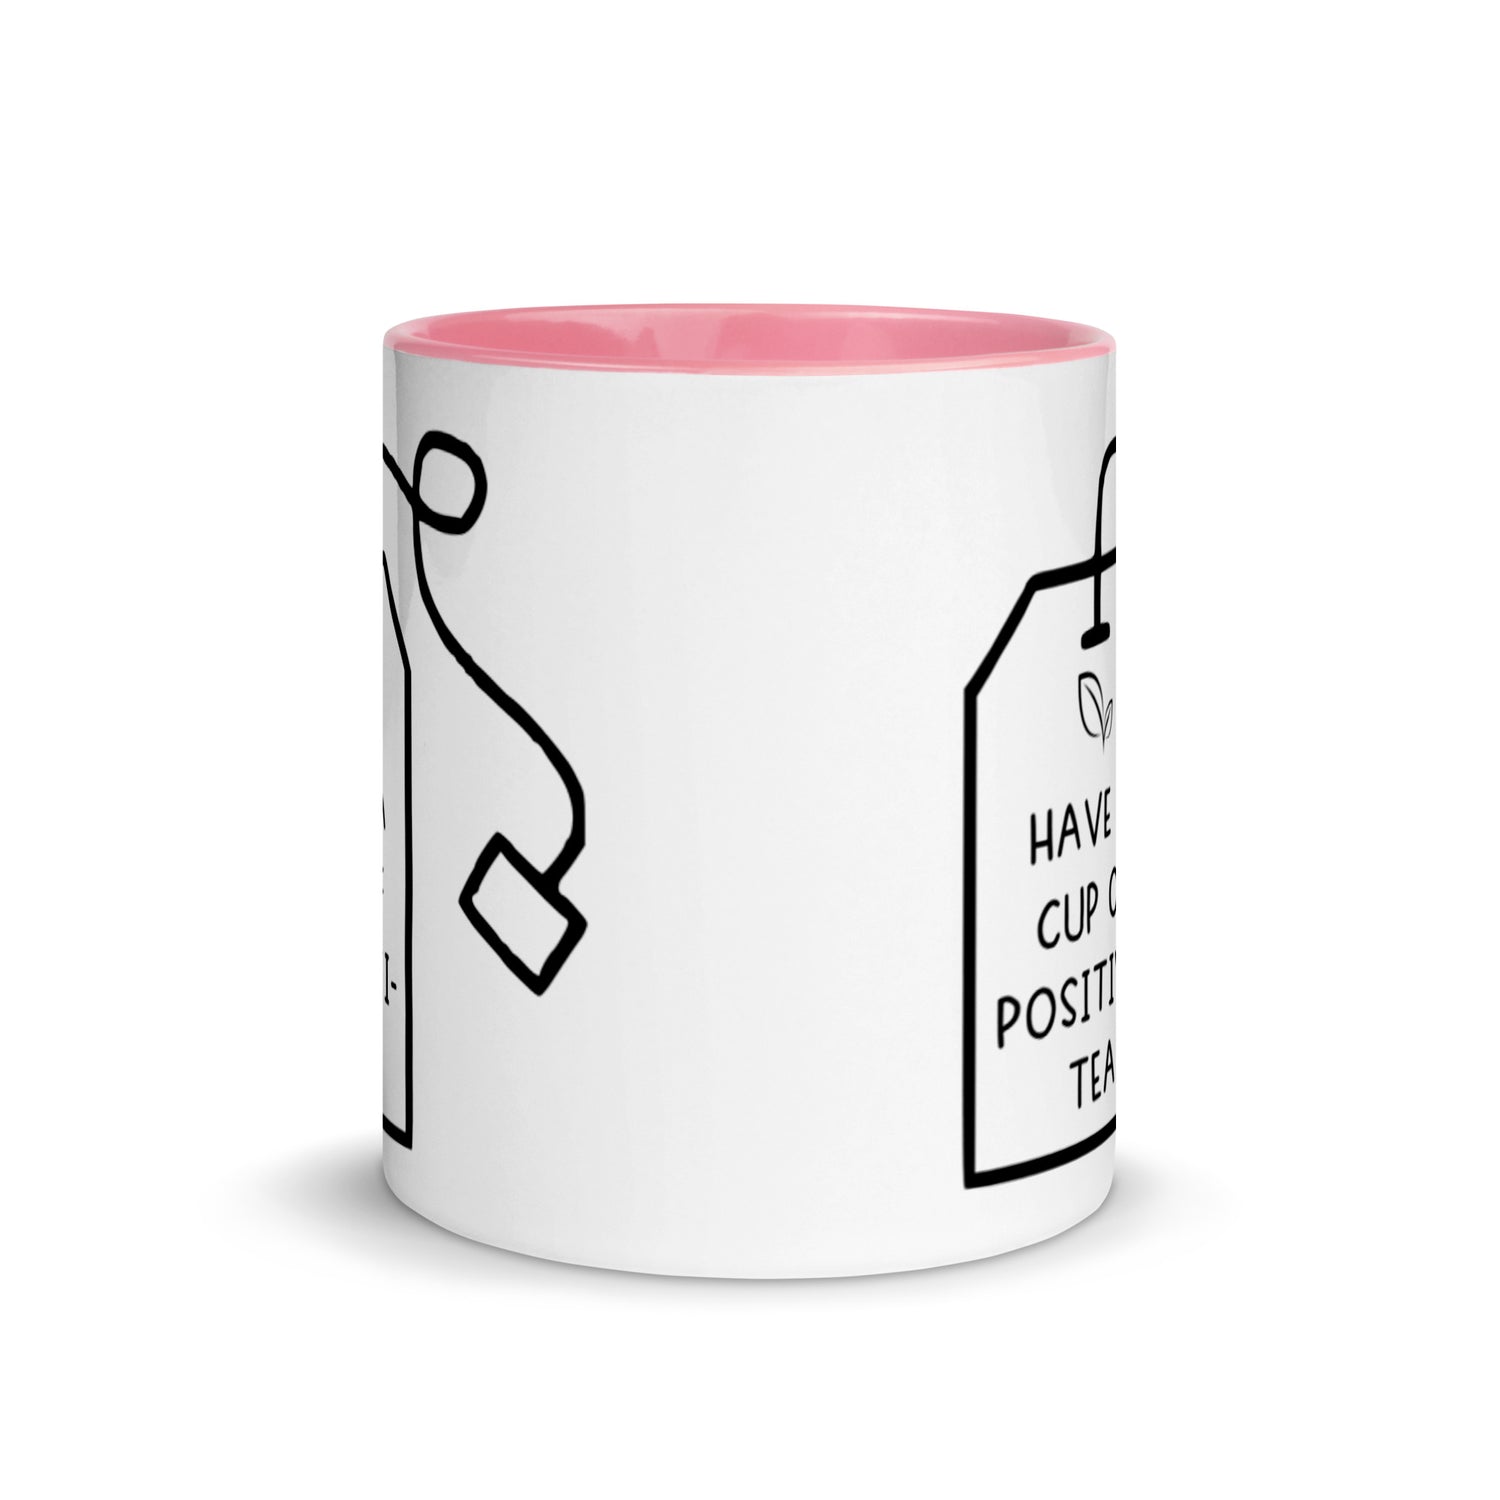 Have a Cup of Positivi-Tea Mug, pink and handle